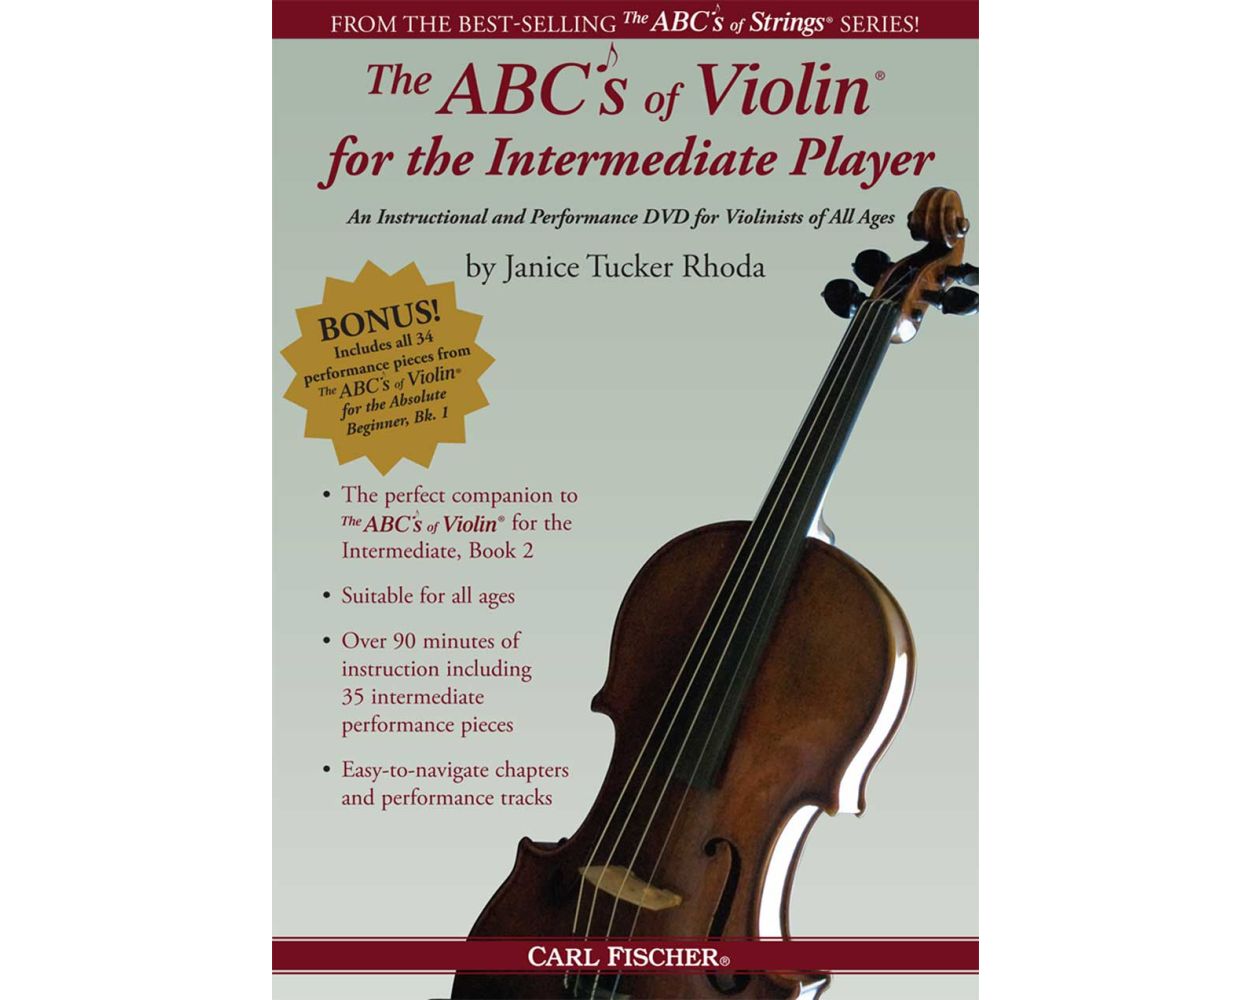 The ABCs of Violin for the Intermediate